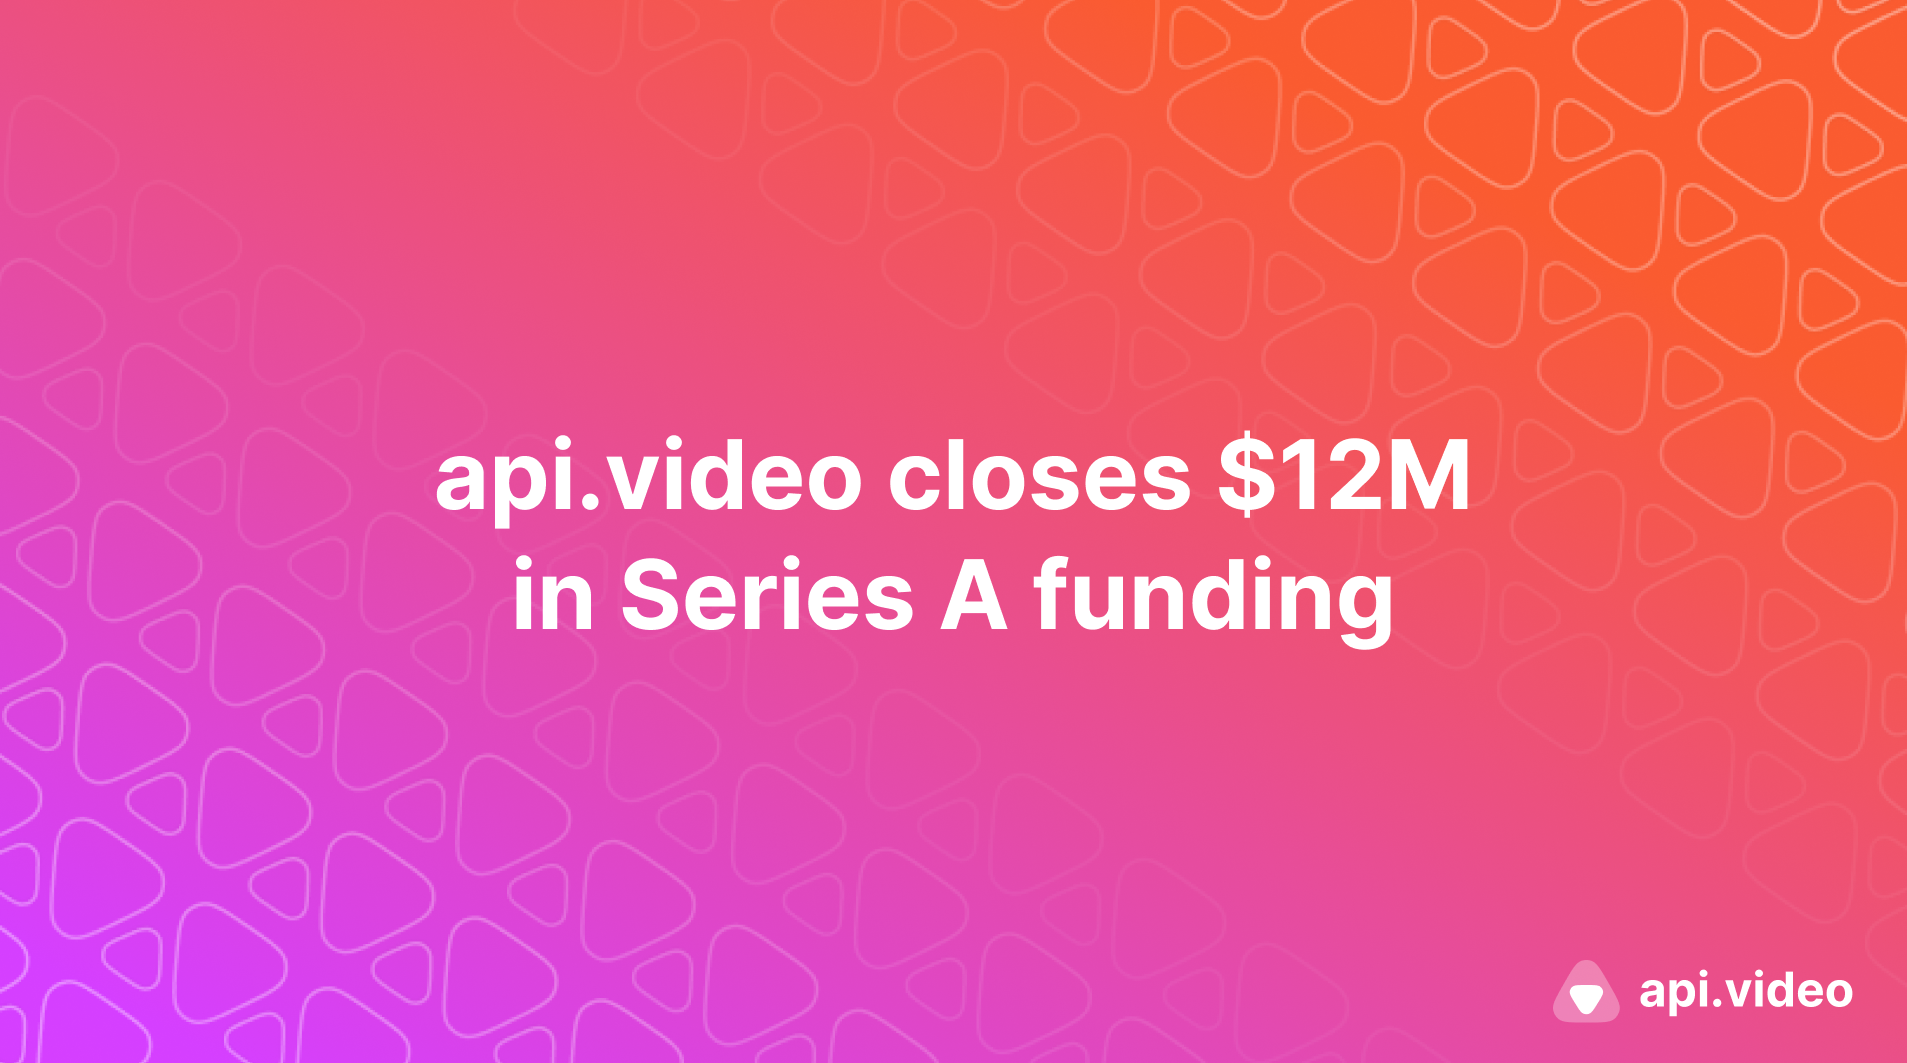 We raised $12M to let you join our video first world